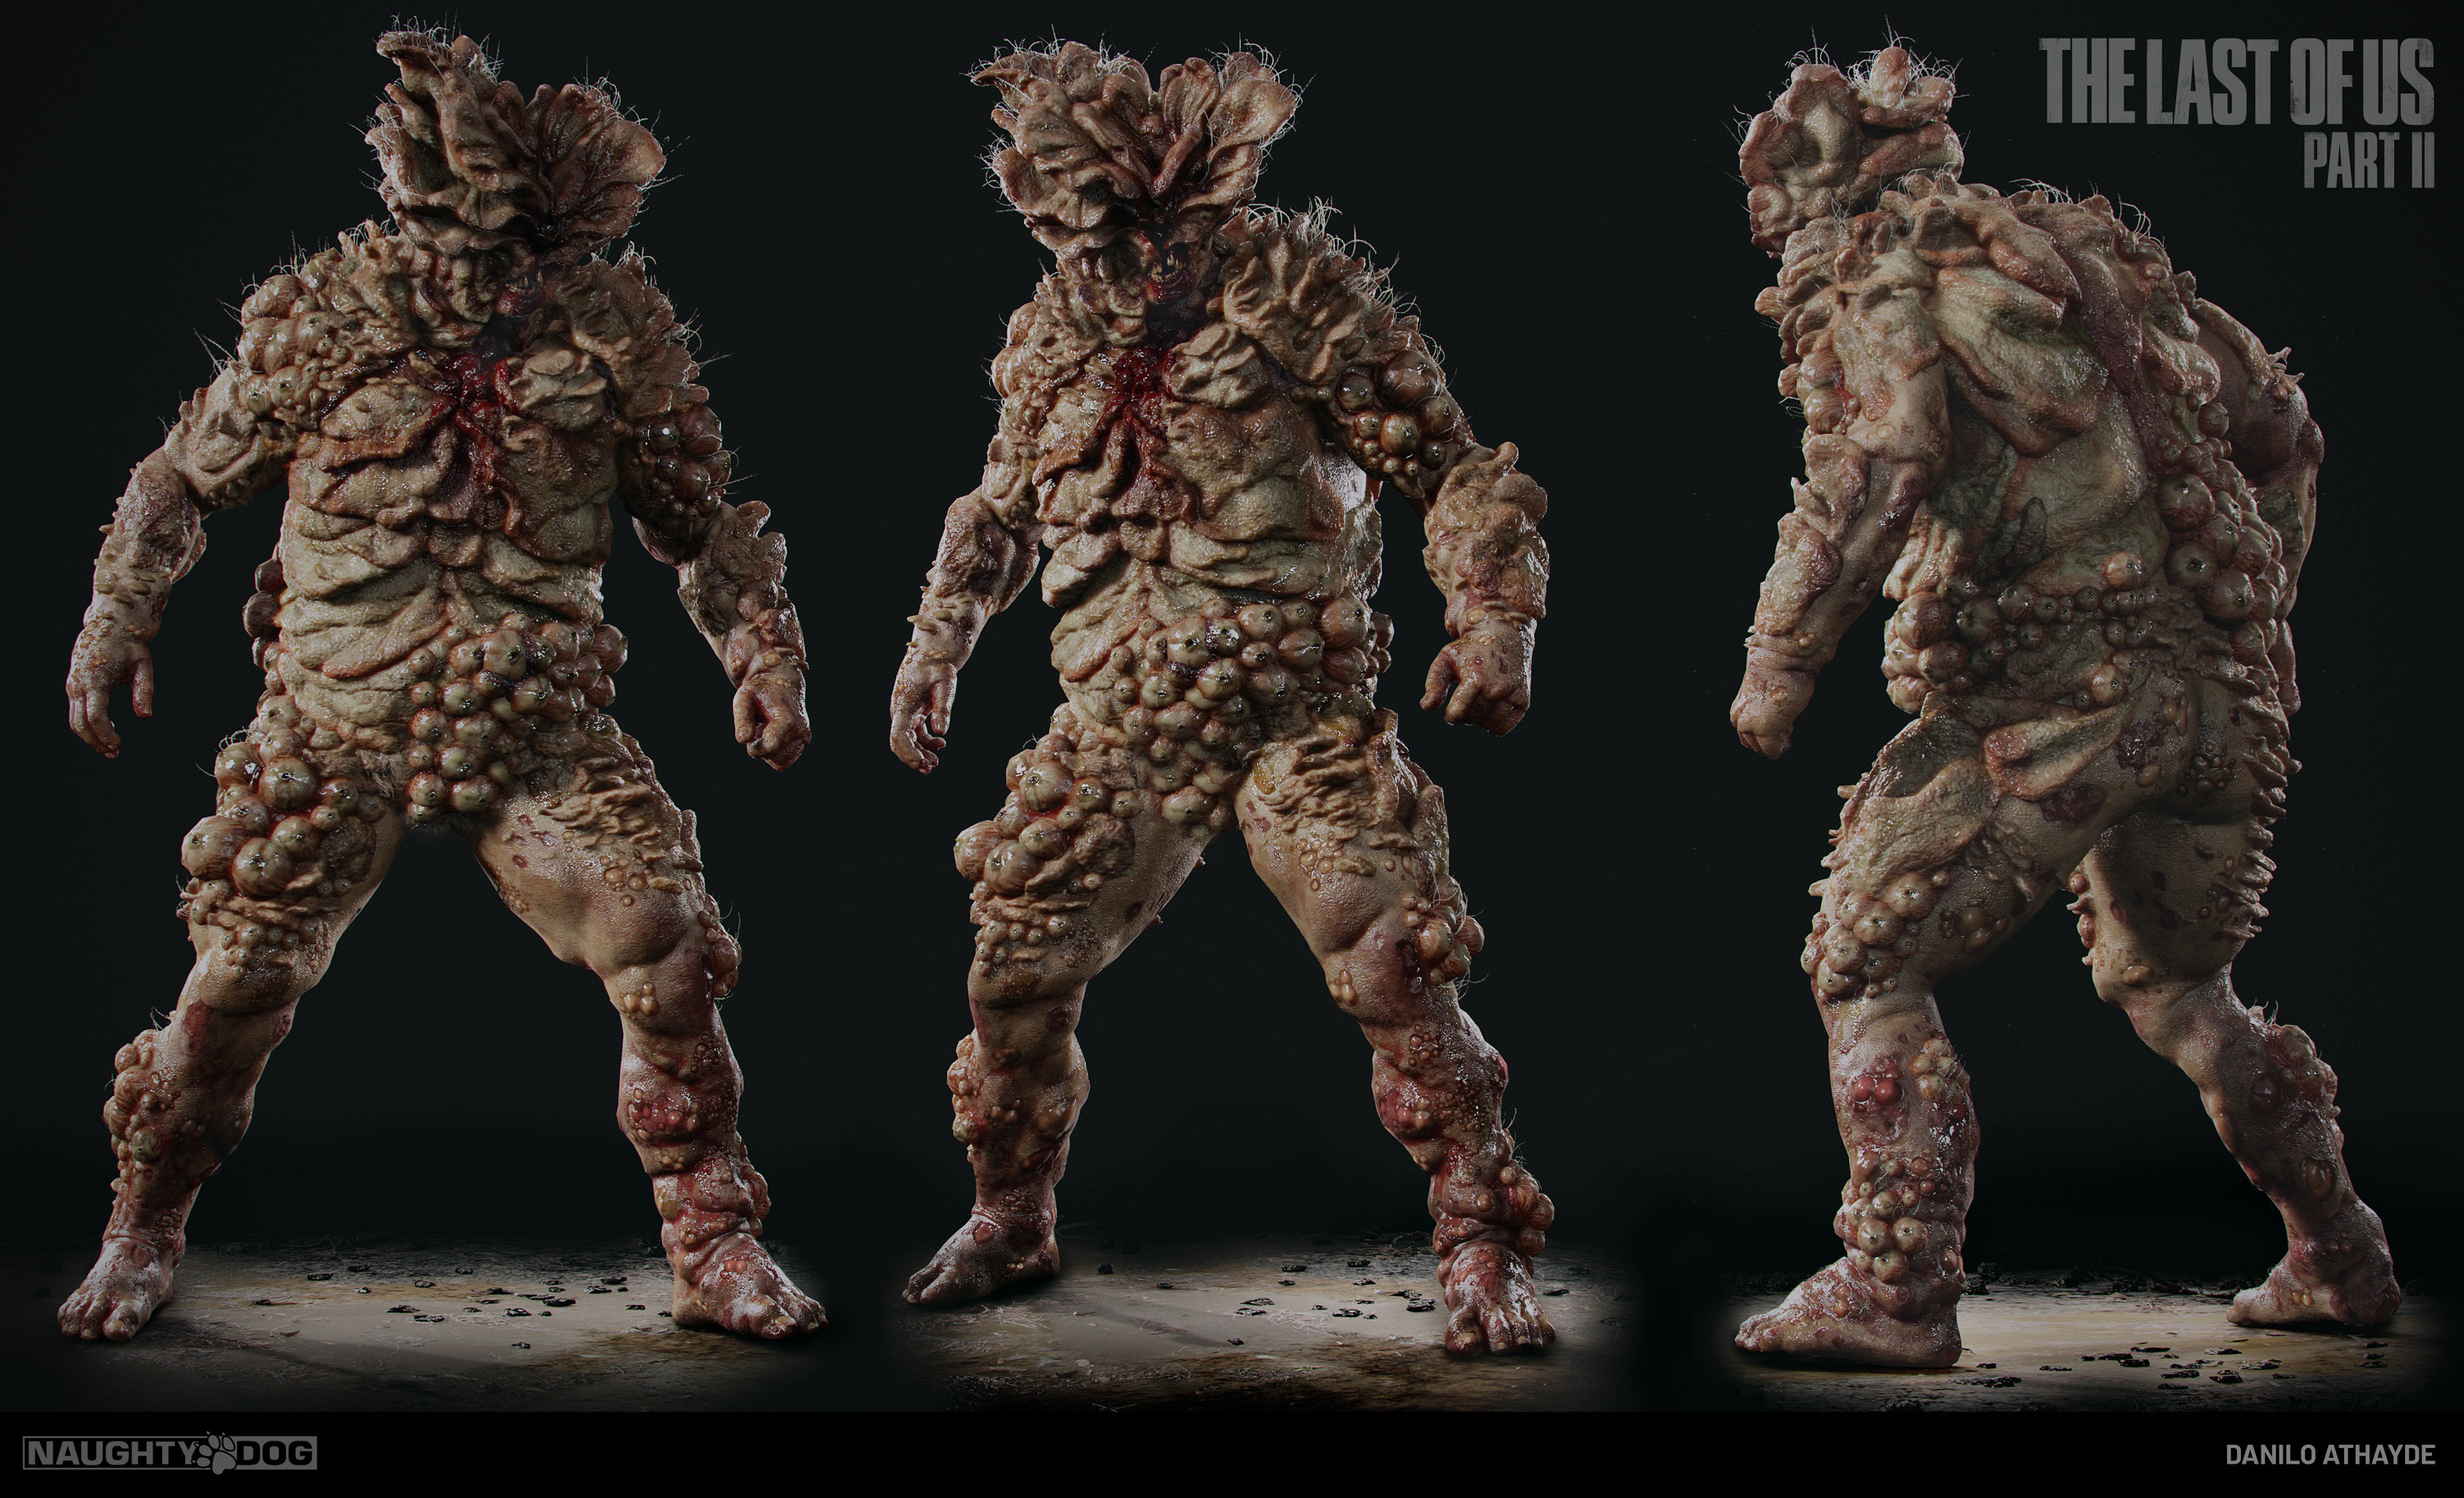 The Bloater in The Last of Us